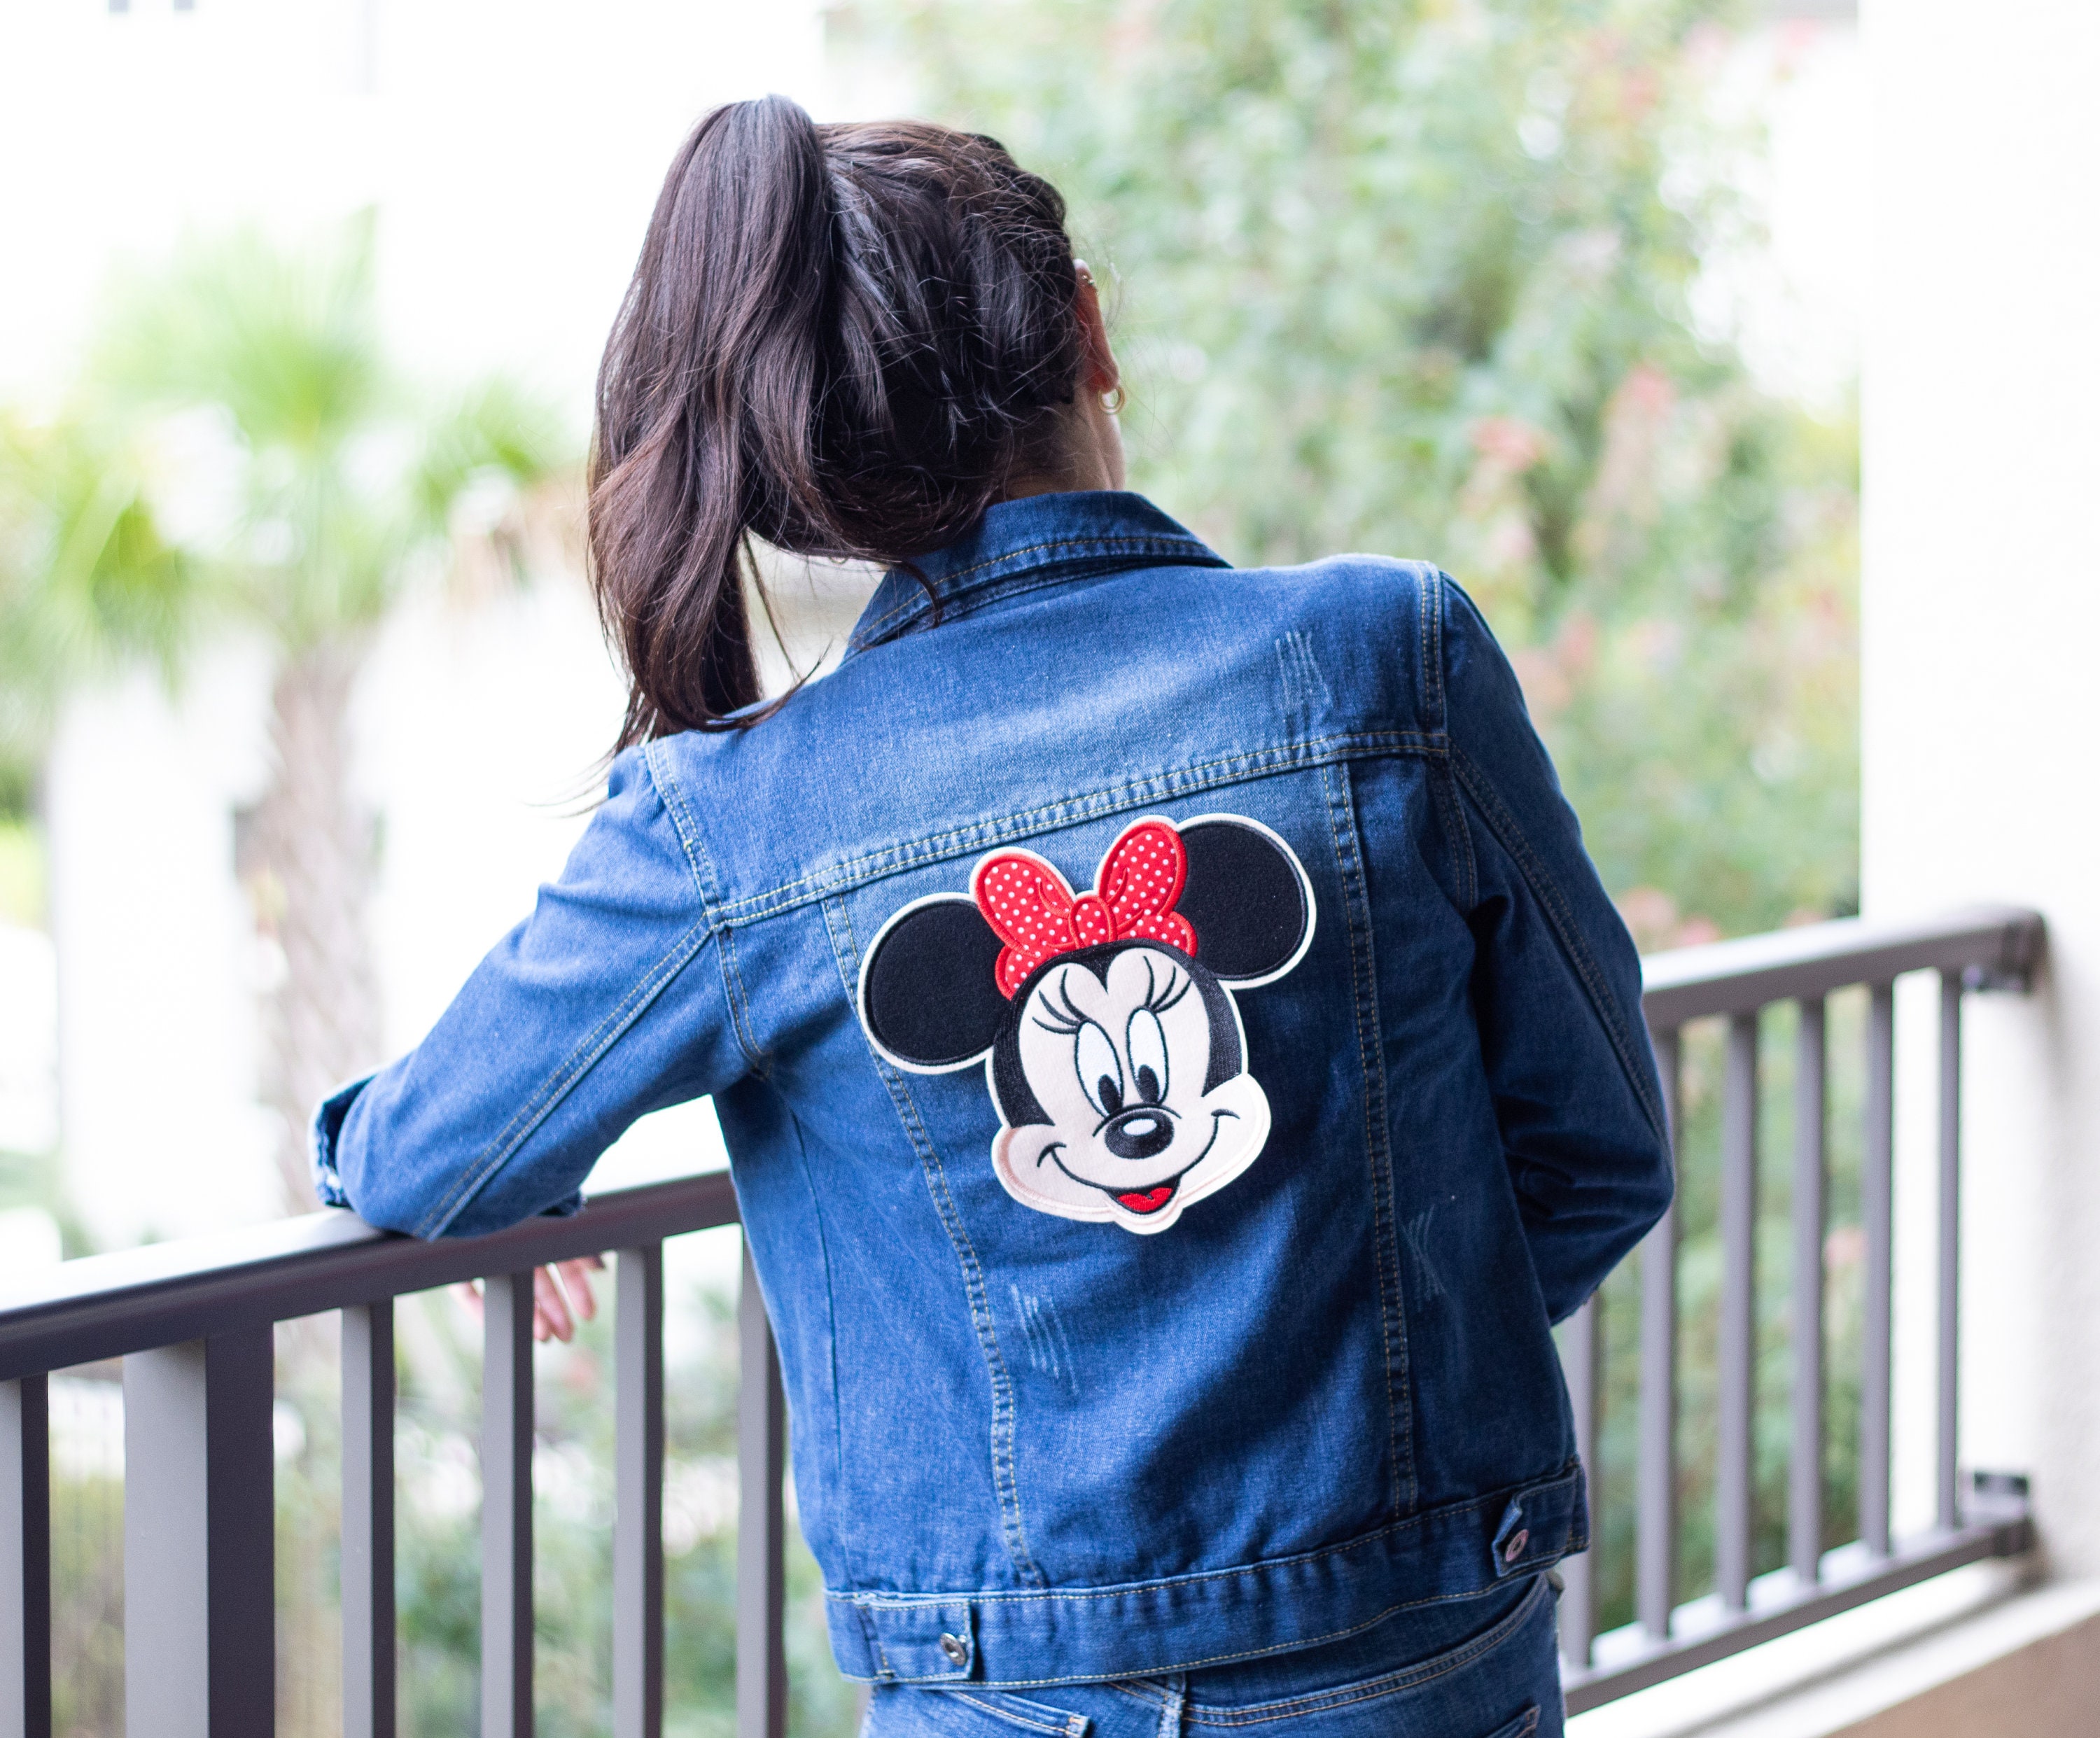 Mickey Minnie Mouse Appliques Thermo Adhesive Patches for Disney Clothes Mickey  Iron on Patch Clothes Heat Transfer Girl T-shirt